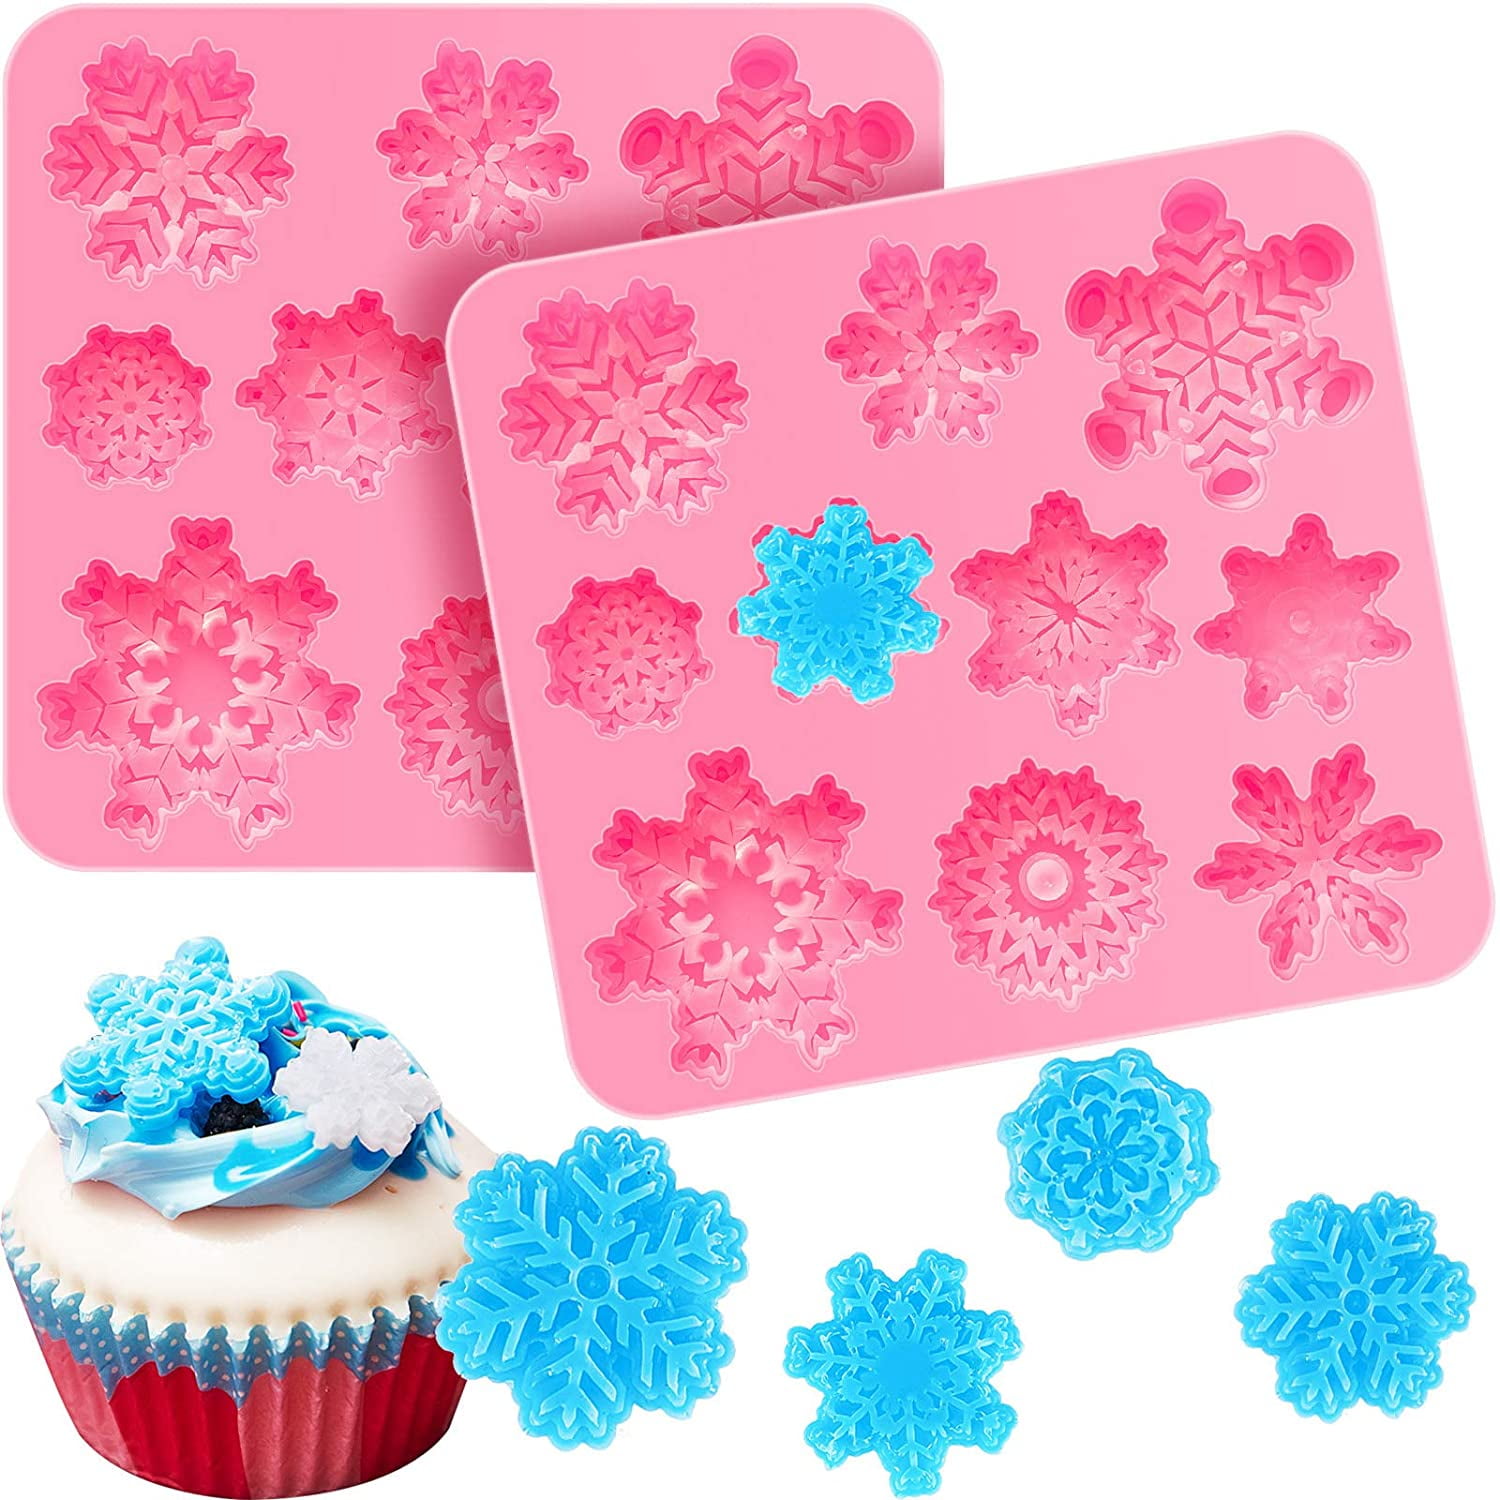 Details about   CHRISTMAS HOLIDAY SNOWFLAKE WINTER CUPCAKE CAKE PAN CHOCOLATE CANDY MOLD 